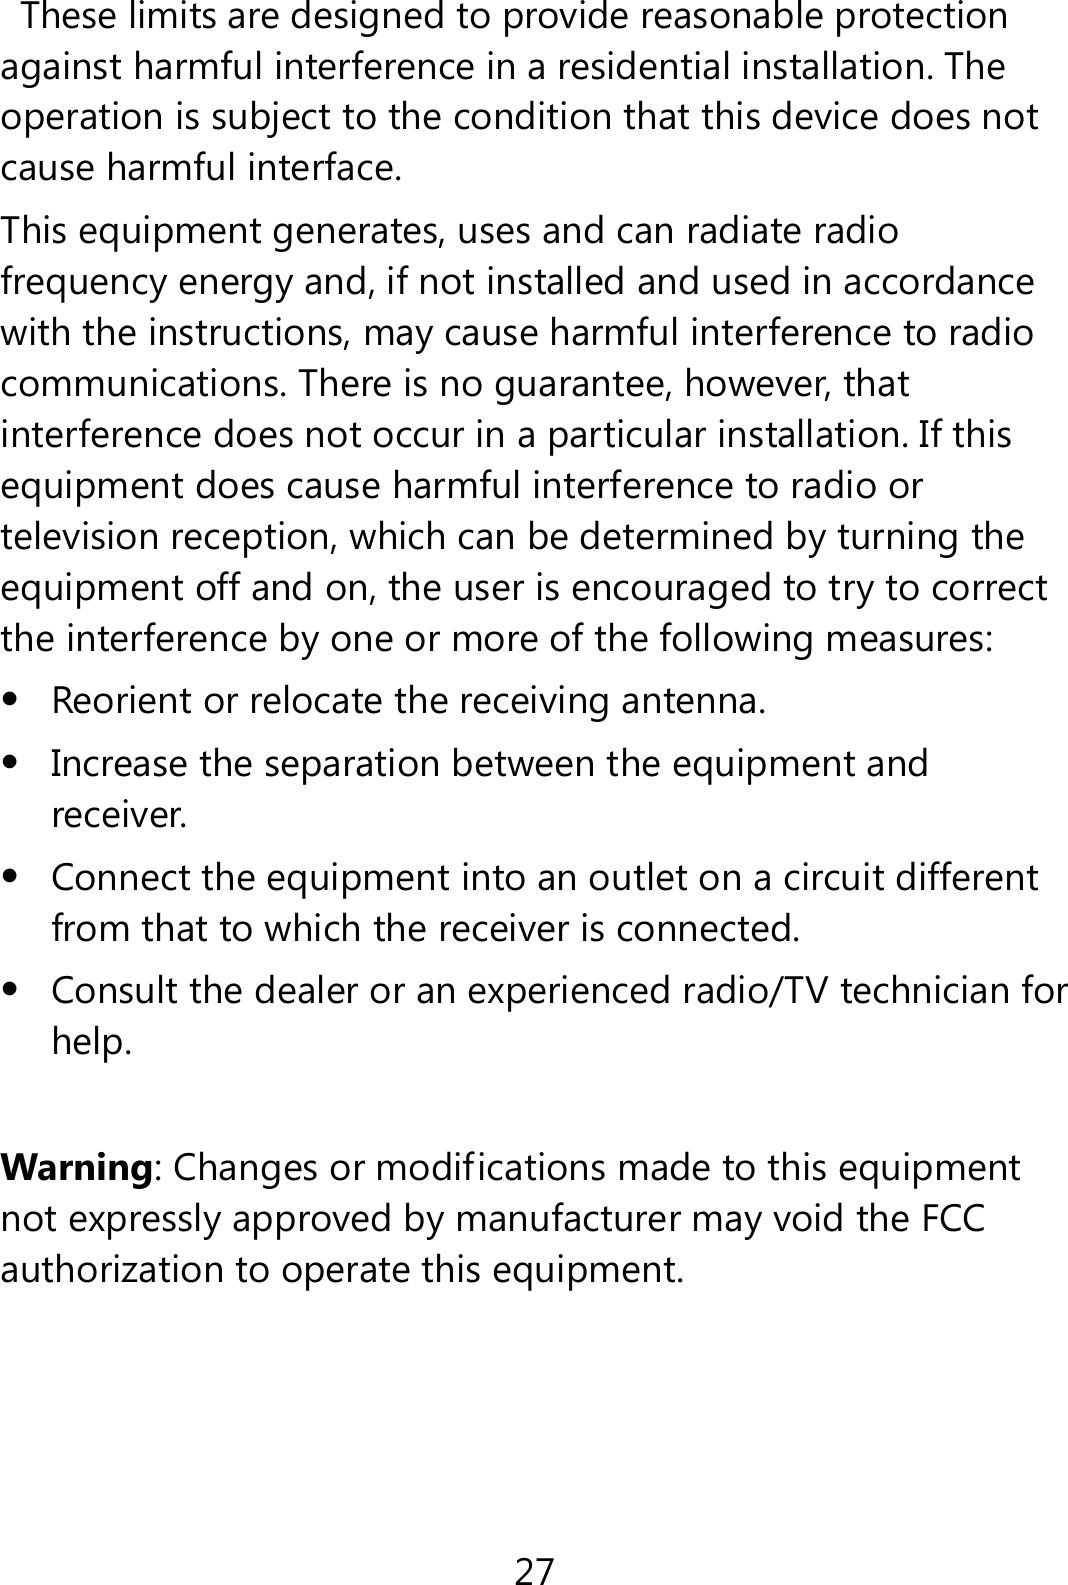 27   These limits are designed to provide reasonable protection against harmful interference in a residential installation. The operation is subject to the condition that this device does not cause harmful interface. This equipment generates, uses and can radiate radio frequency energy and, if not installed and used in accordance with the instructions, may cause harmful interference to radio communications. There is no guarantee, however, that interference does not occur in a particular installation. If this equipment does cause harmful interference to radio or television reception, which can be determined by turning the equipment off and on, the user is encouraged to try to correct the interference by one or more of the following measures:  Reorient or relocate the receiving antenna.  Increase the separation between the equipment and receiver.  Connect the equipment into an outlet on a circuit different from that to which the receiver is connected.  Consult the dealer or an experienced radio/TV technician for help.  Warning: Changes or modifications made to this equipment not expressly approved by manufacturer may void the FCC authorization to operate this equipment.    